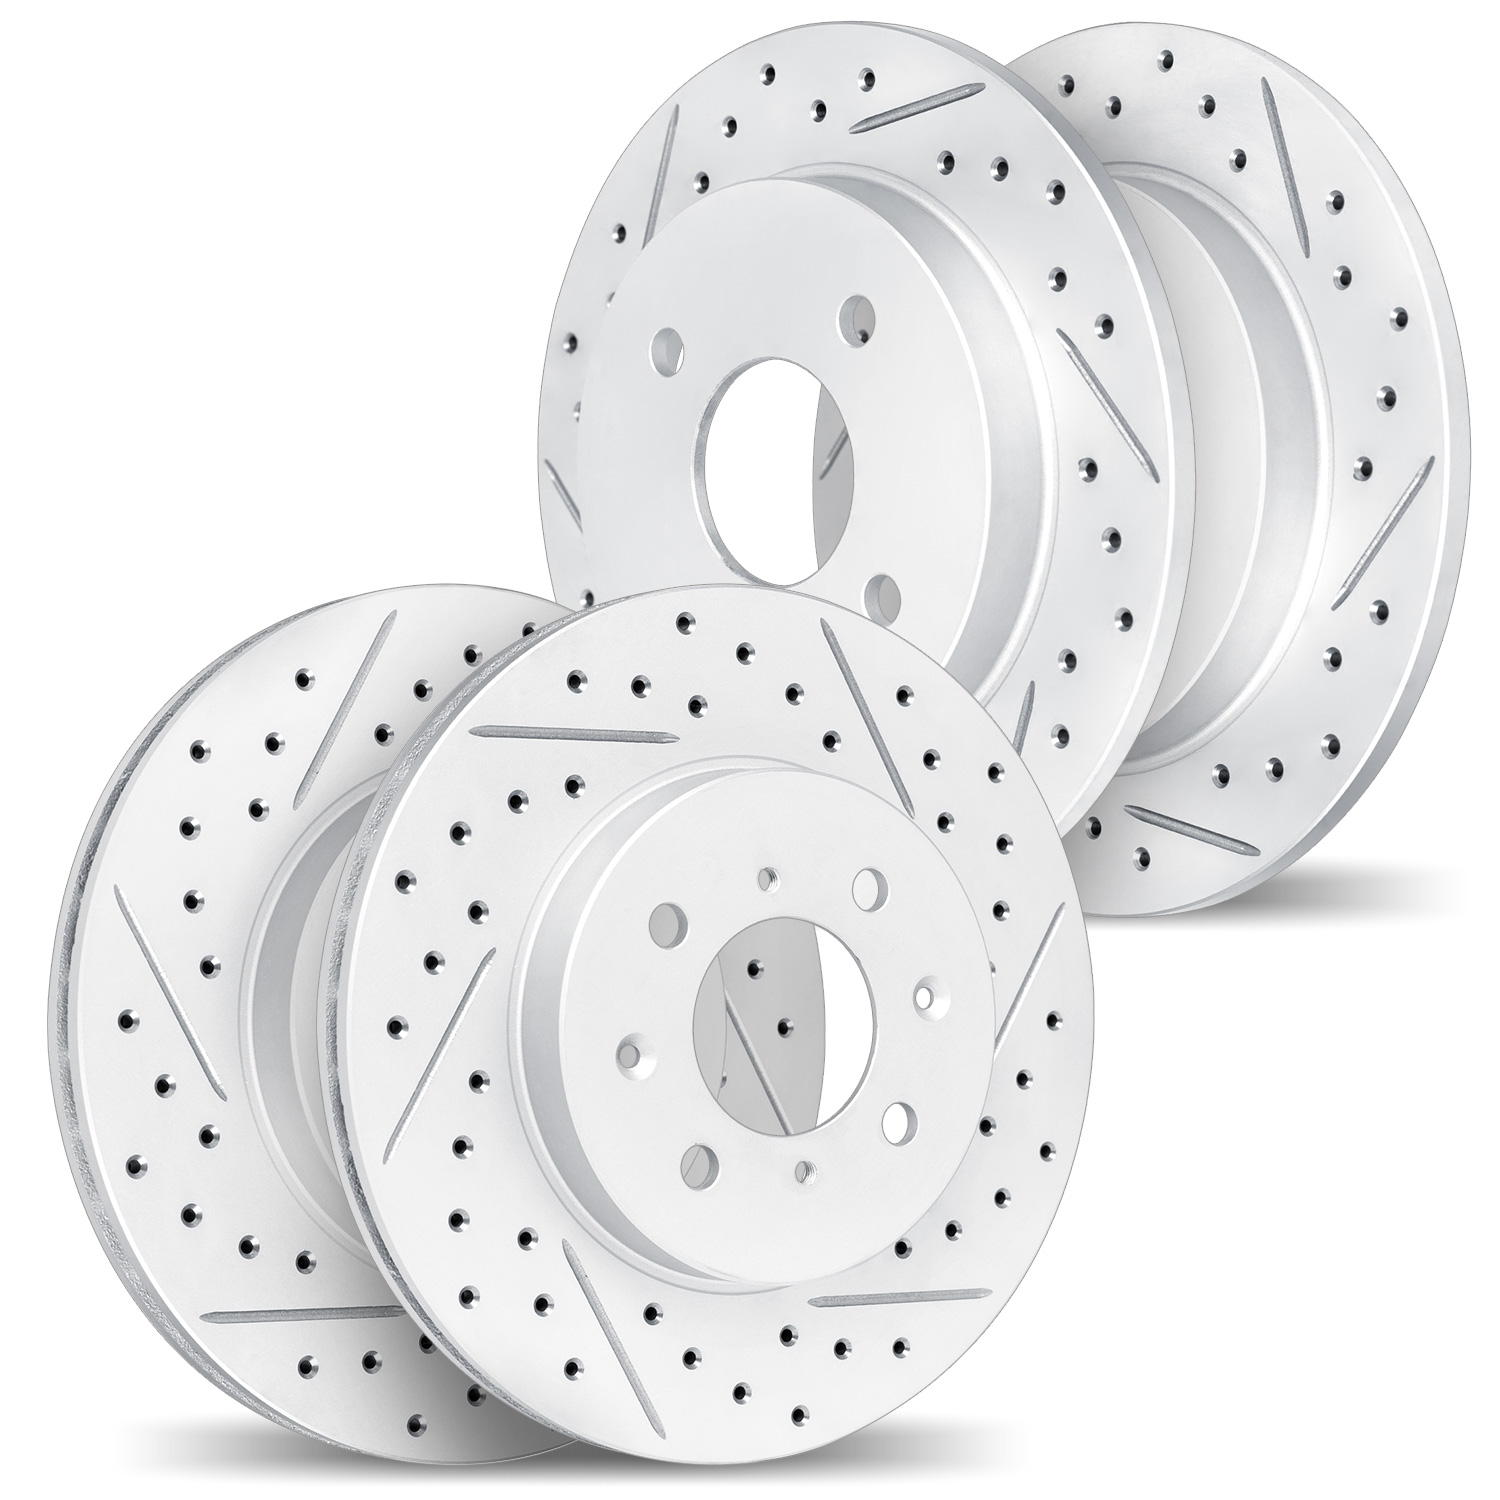 2004-54037 Geoperformance Drilled/Slotted Brake Rotors, Fits Select Ford/Lincoln/Mercury/Mazda, Position: Front and Rear